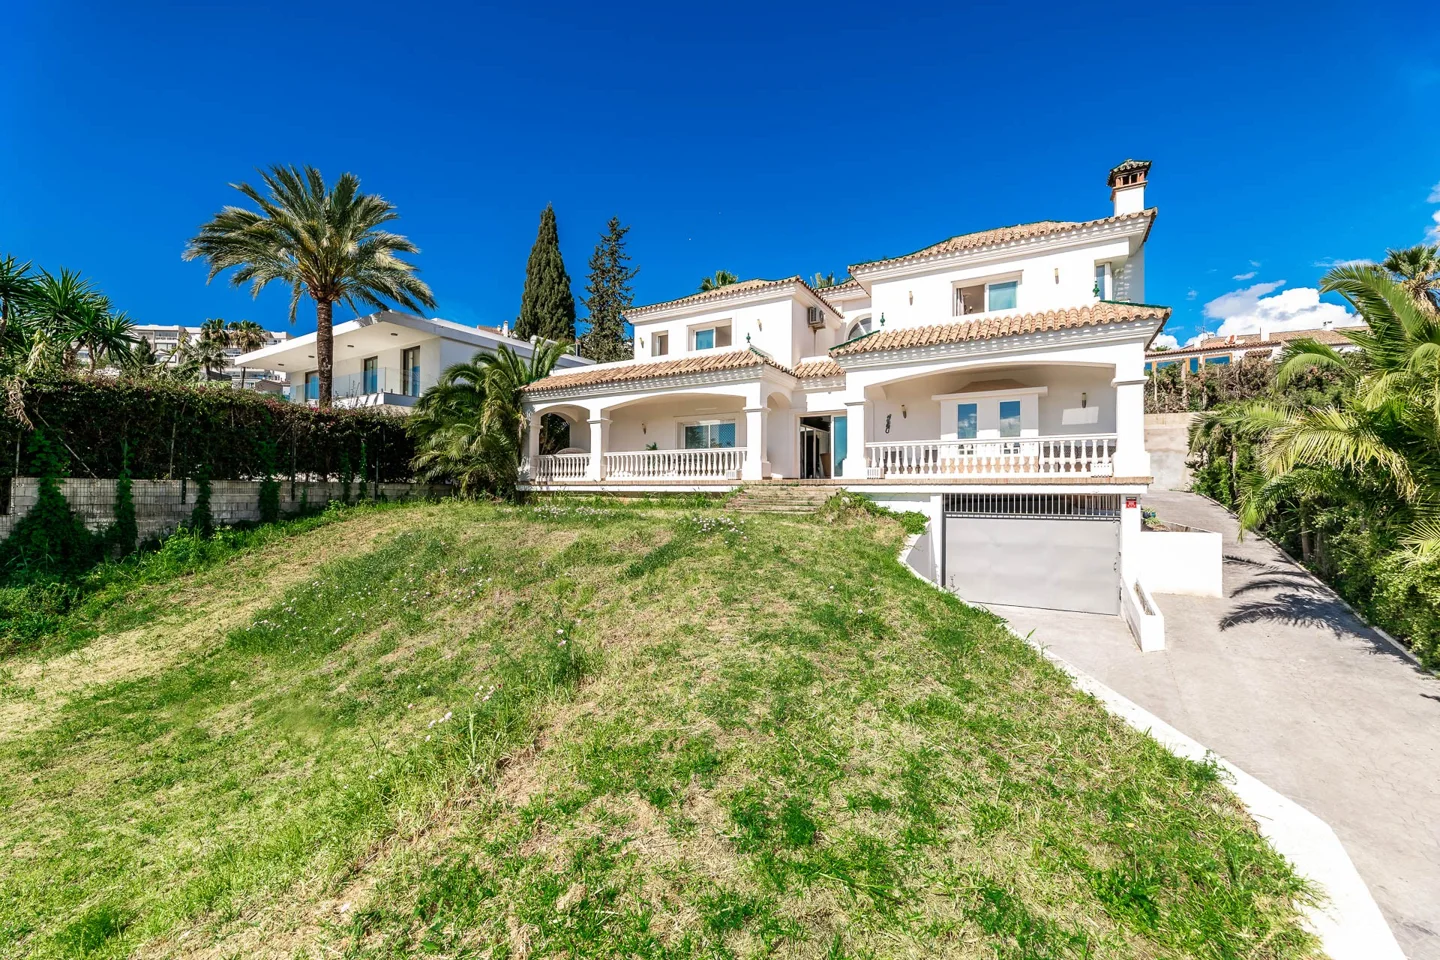 Nueva Andalucia: Great Villa Investment Opportunity next to Puerto Banús